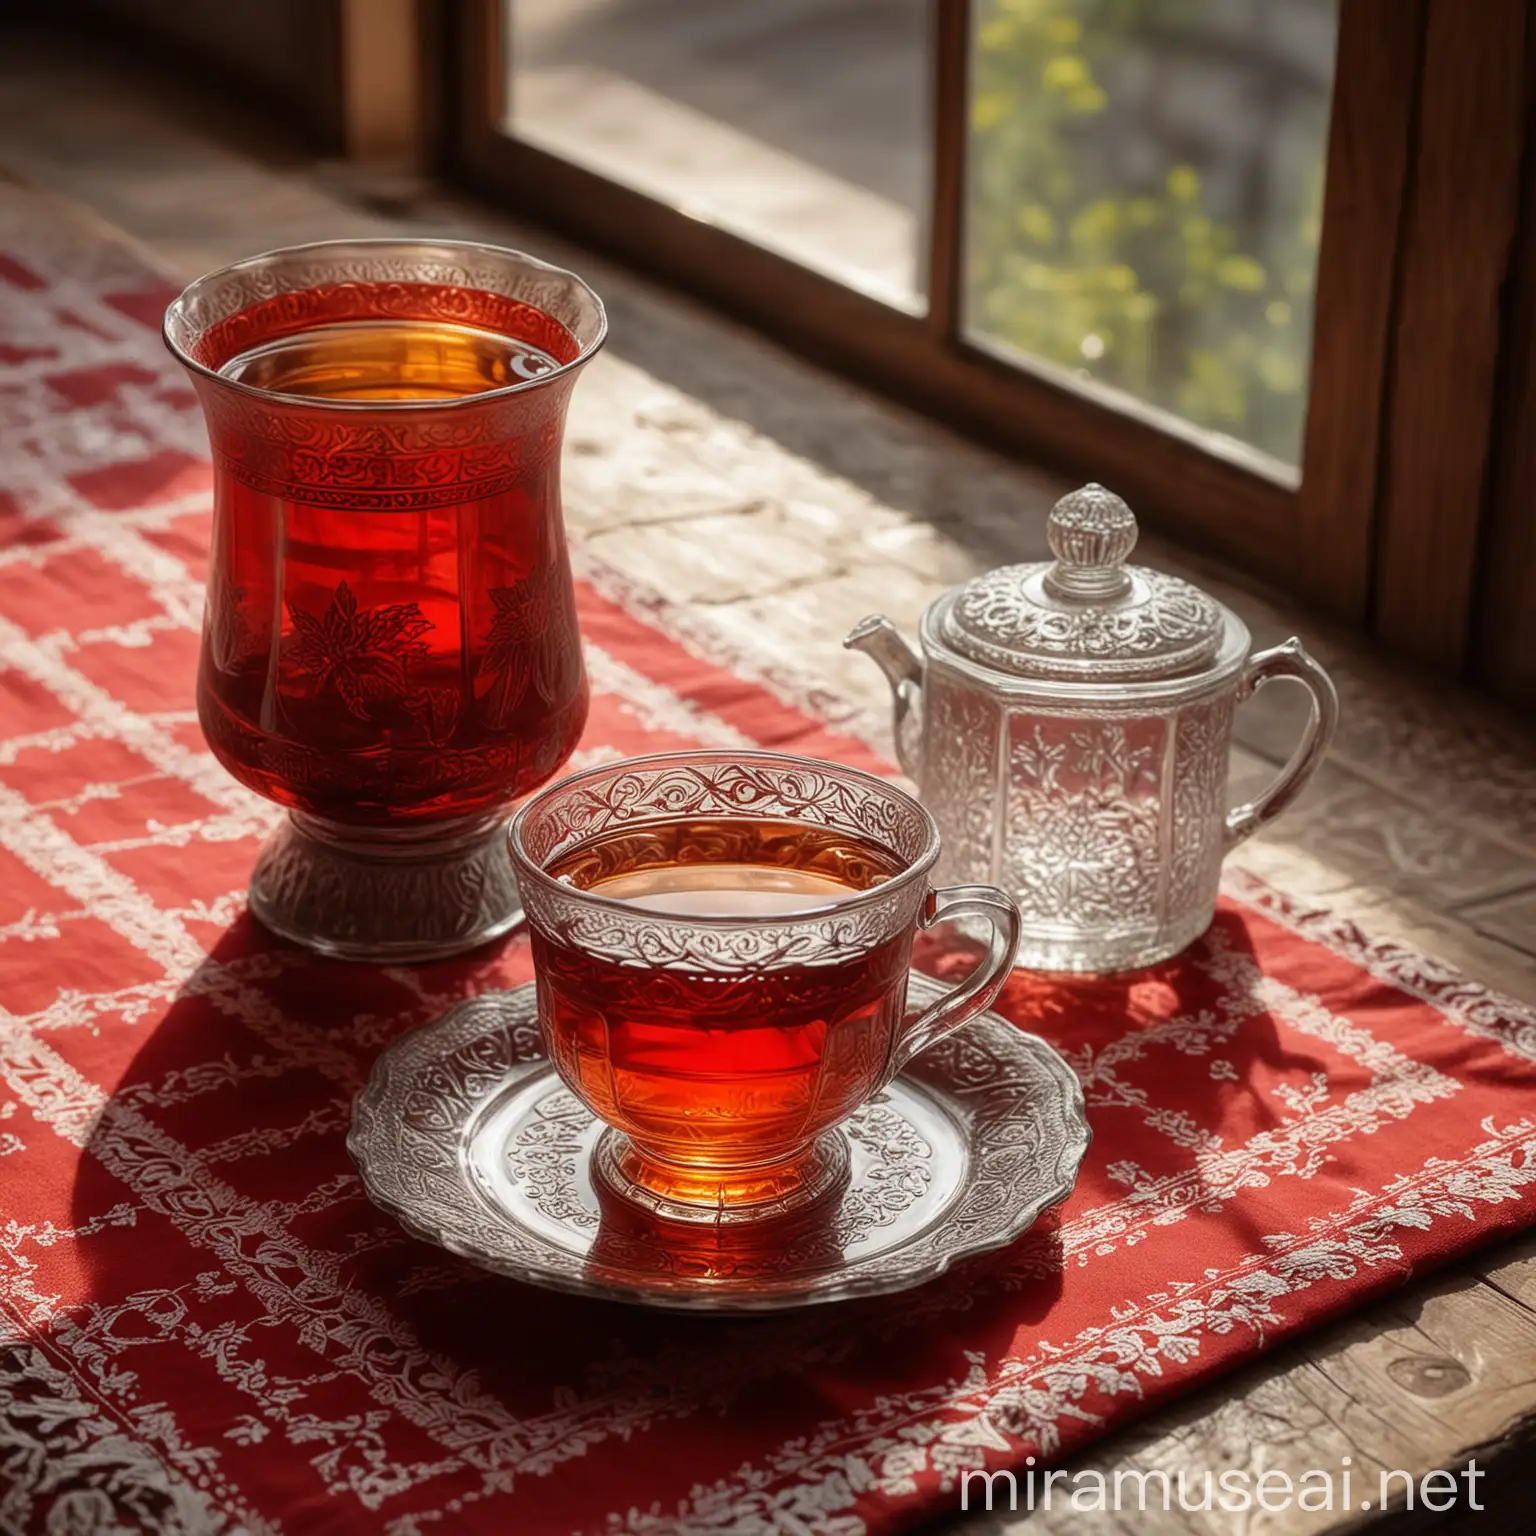 Traditional Tea Ceremony Persian Glass and Chinese Sugar Bowl on Wooden Table